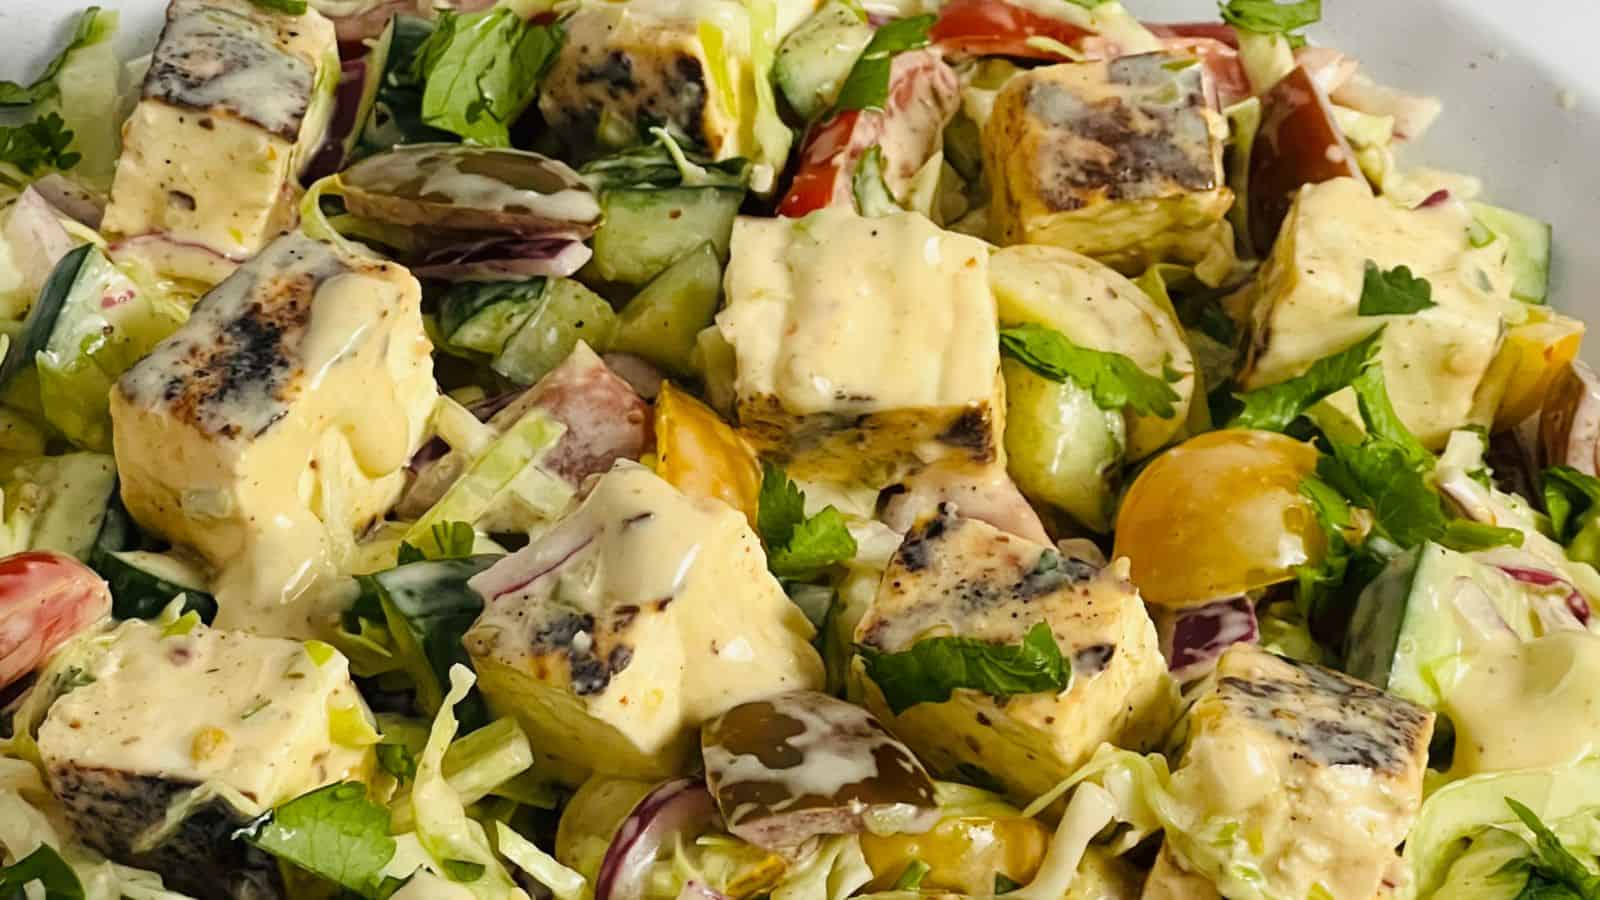 A close-up of a salad featuring grilled tofu cubes, cherry tomatoes, cucumber slices, and leafy greens, all drizzled with a creamy dressing.